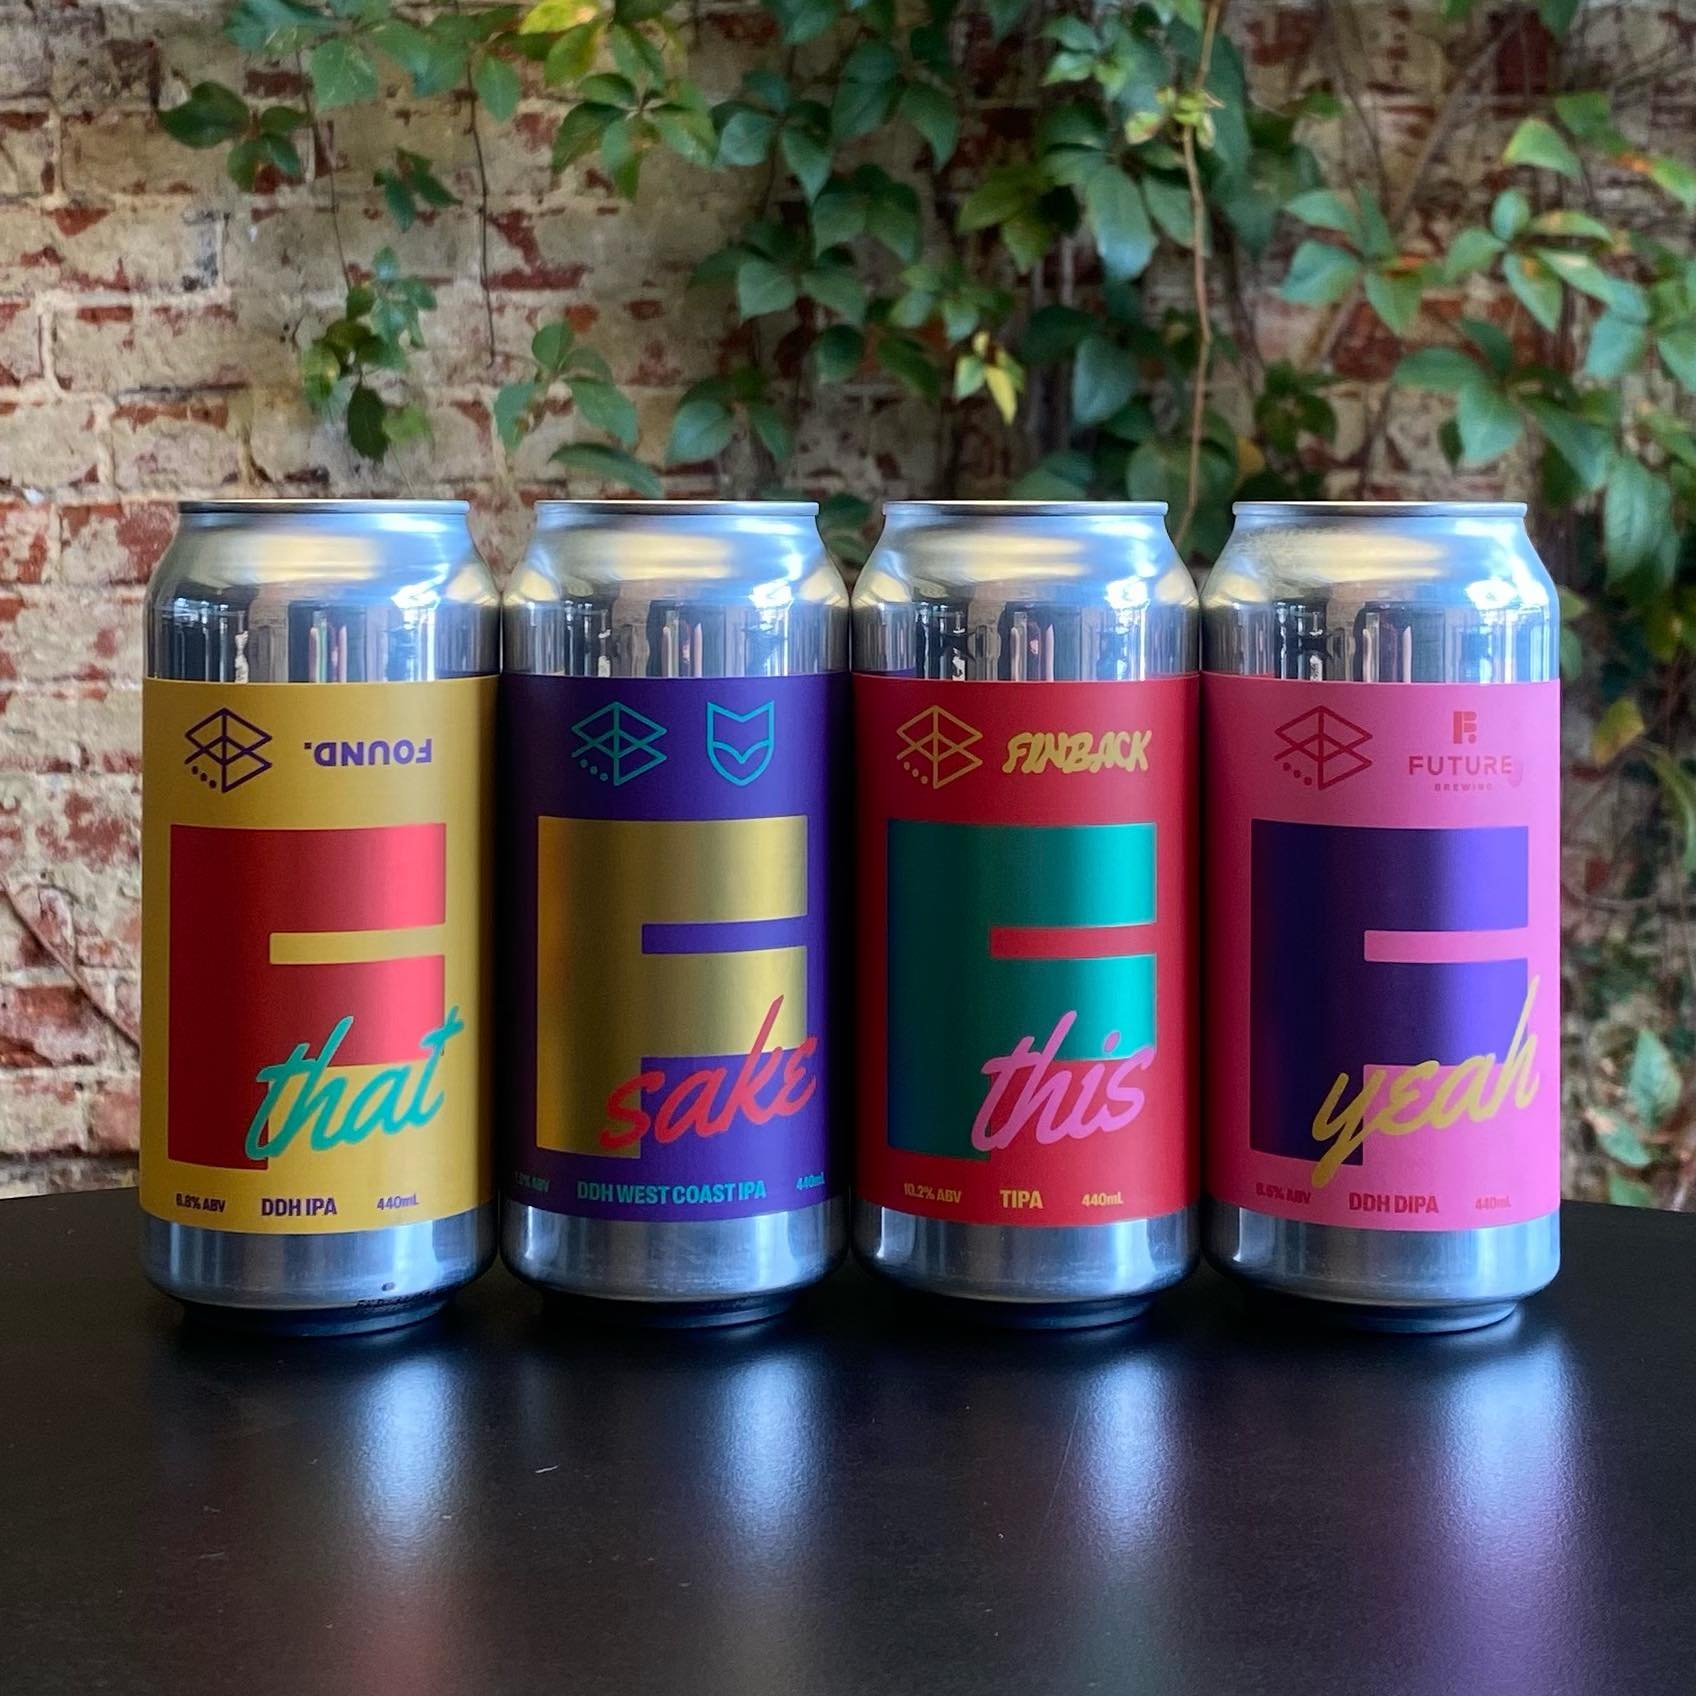 Following on from @rangebrewing day yesterday we&rsquo;re F-ing excited to unveil the full range of F Series beers brewed in conjunction with Juicy Fest this year!

@found.lab.byford 
@foxfridaybrewery 
@finbackbrewery 
@futurebrewingsyd 

F-ing-Aye